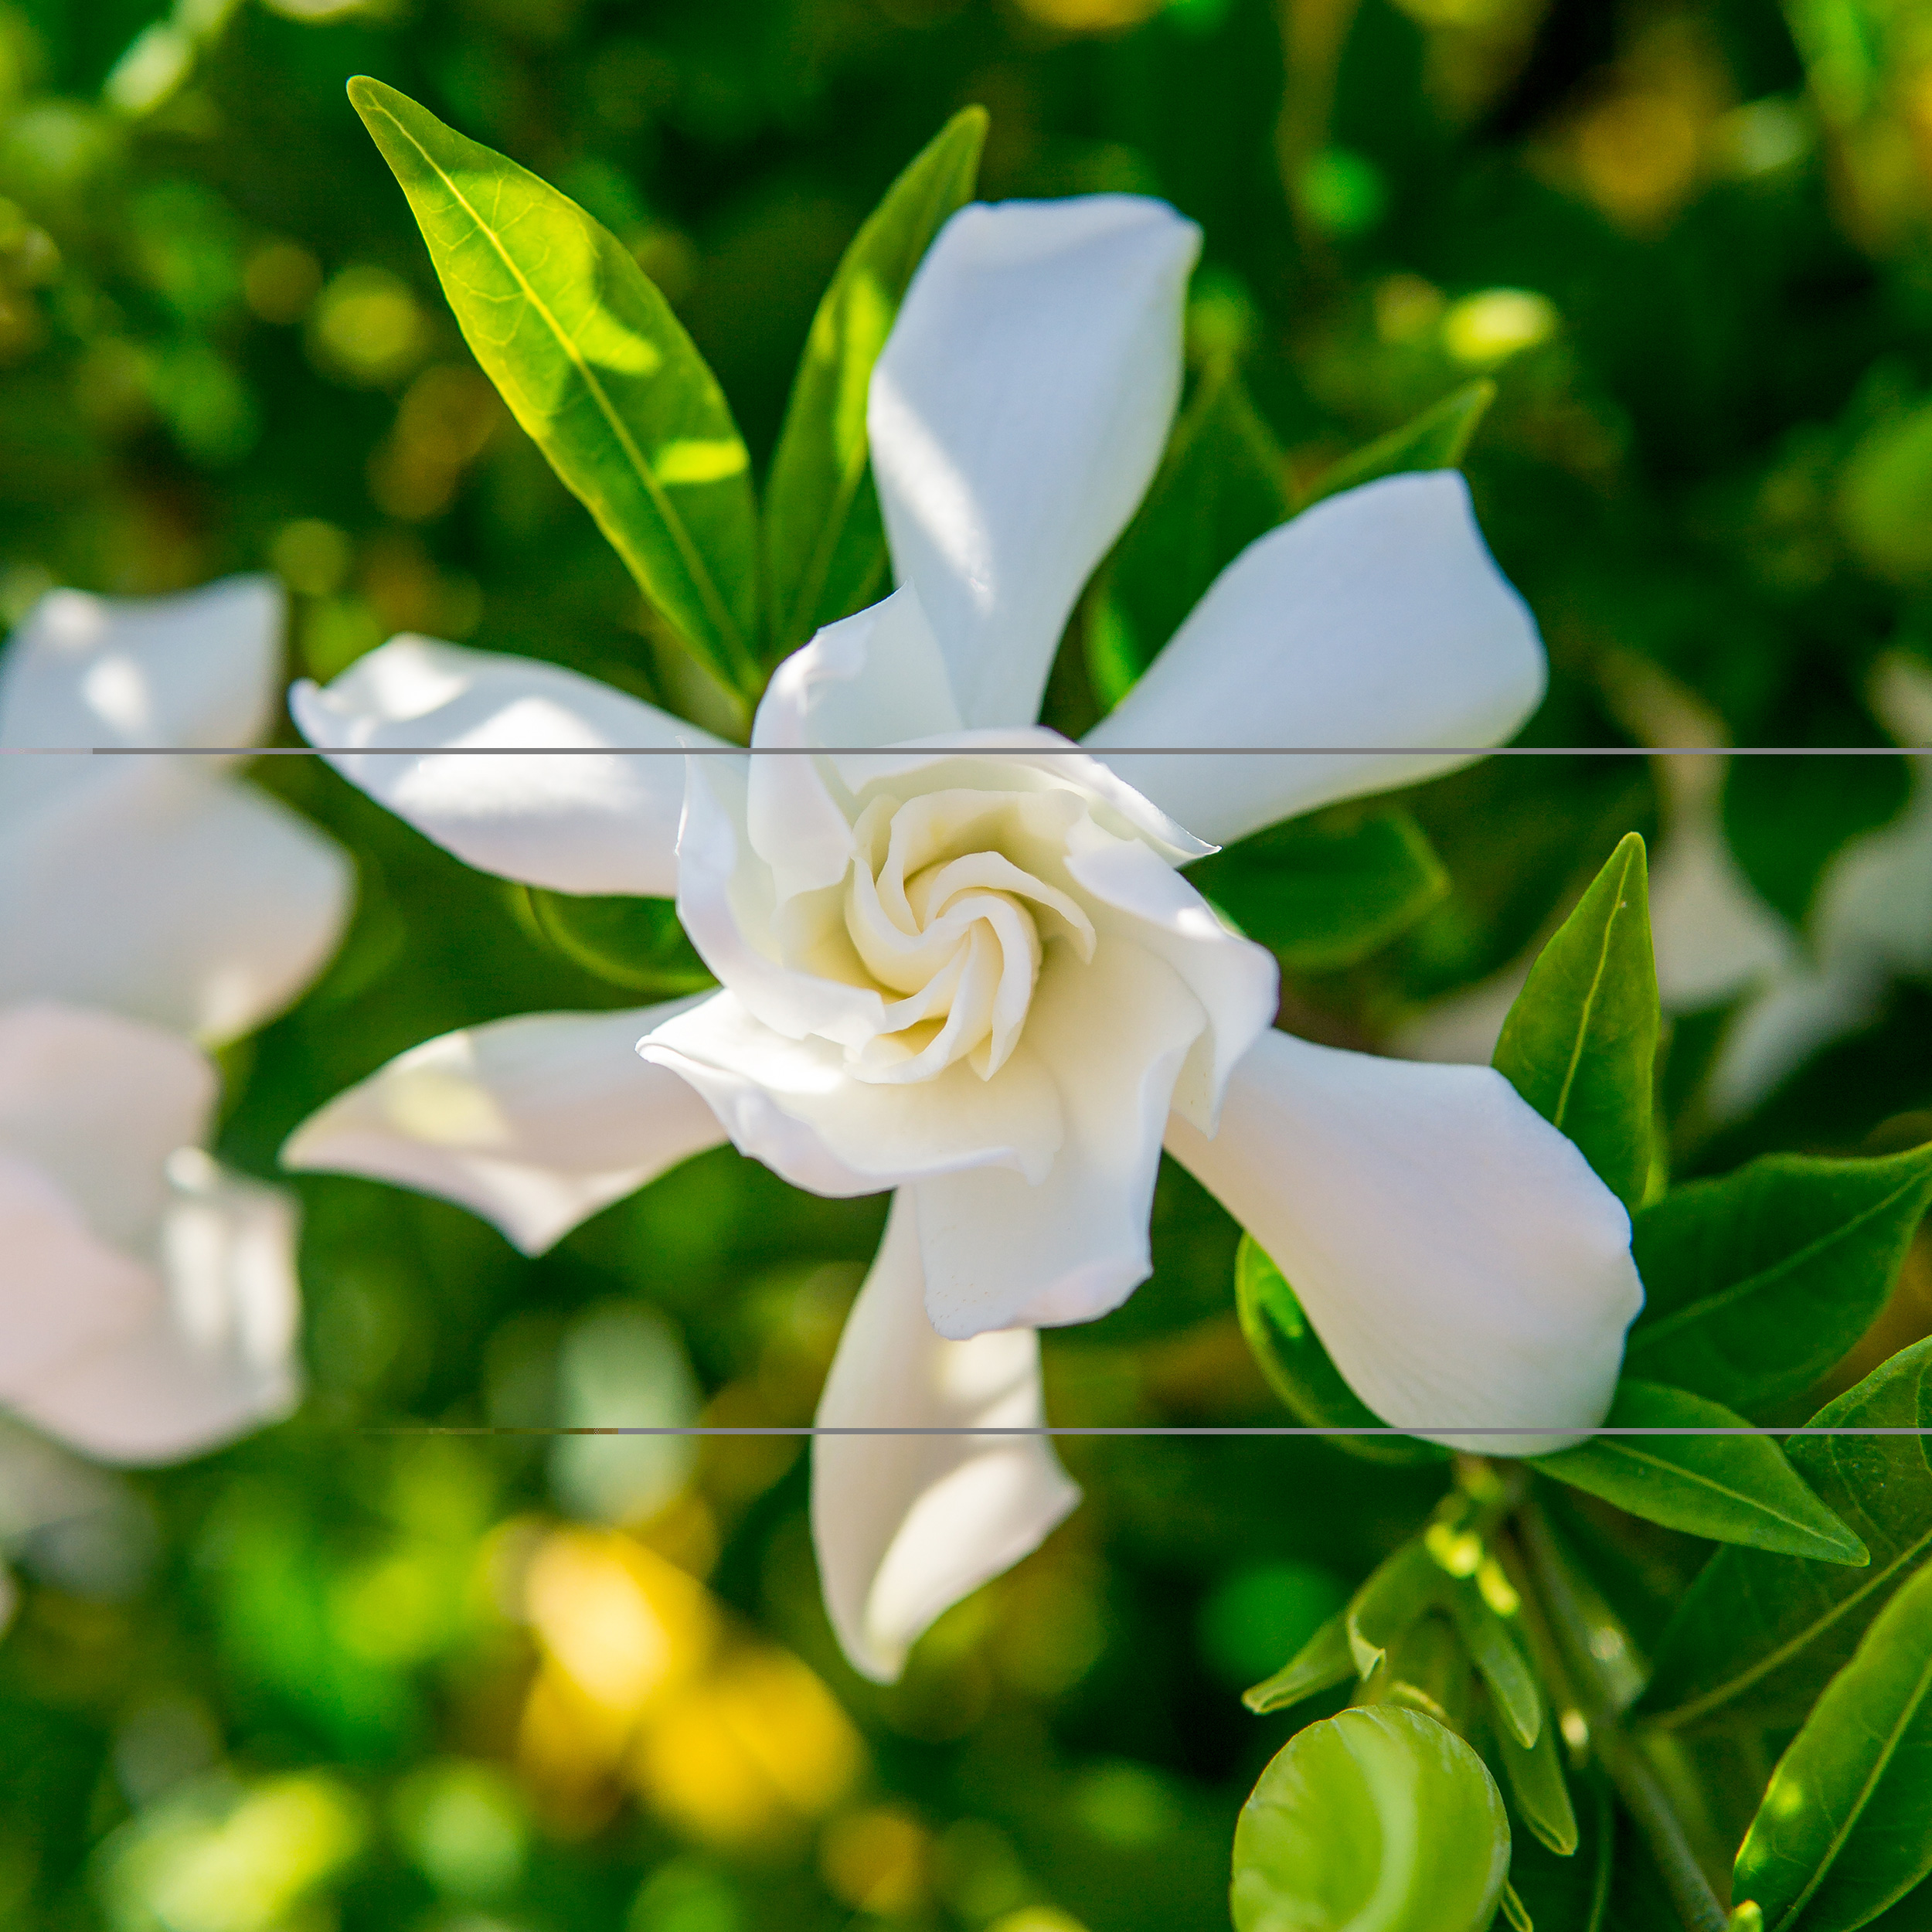 20 Gal. Frost Proof Gardenia   Fragrant White Blooms   Perfect Dwarf Accent  for Any Landscape